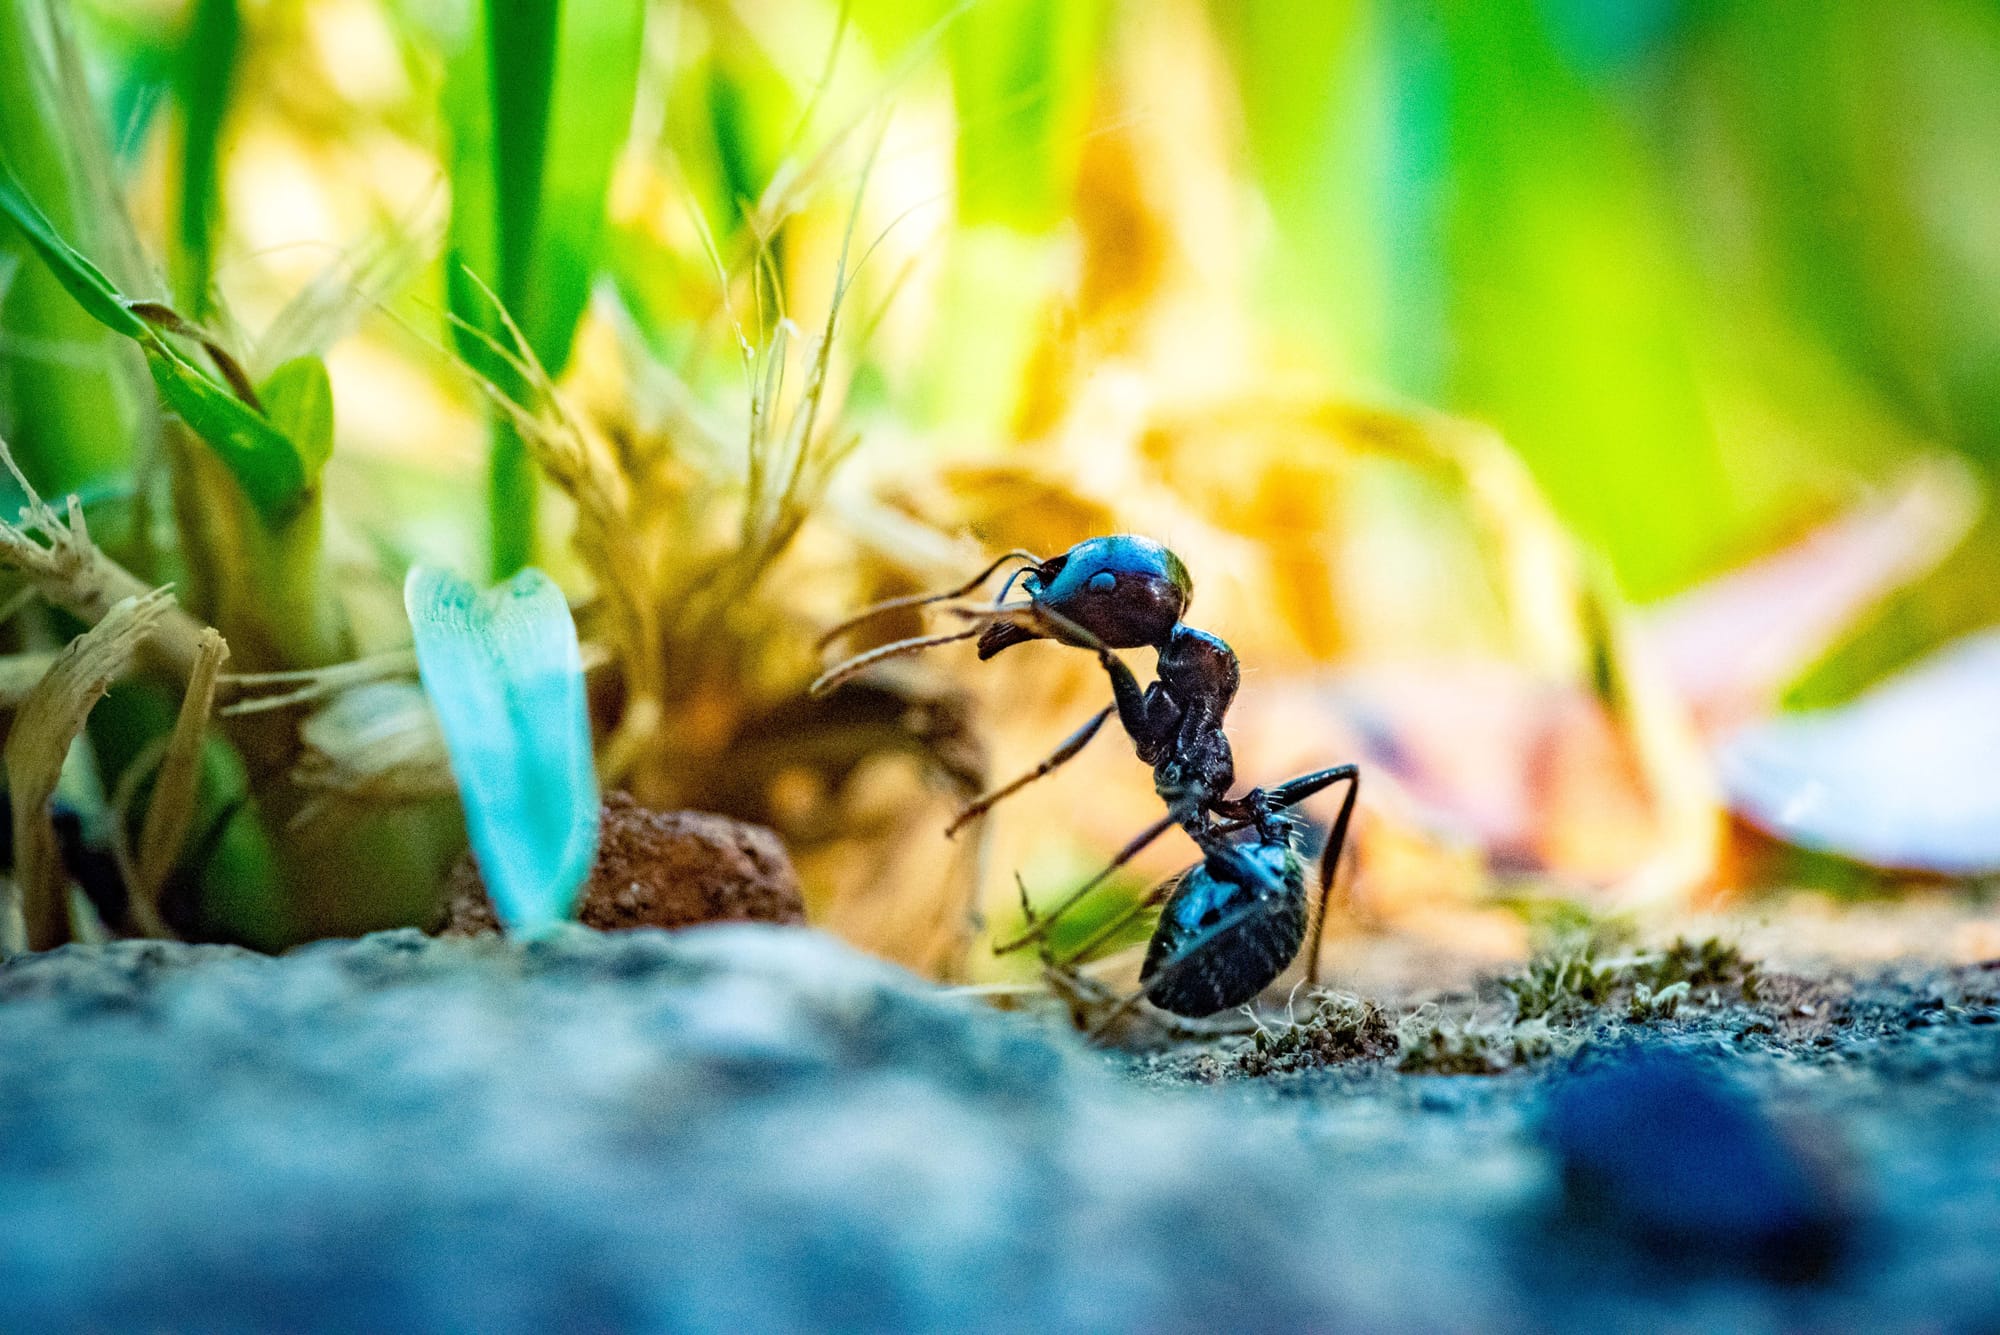 An image of an ant on the soil next to some grass.